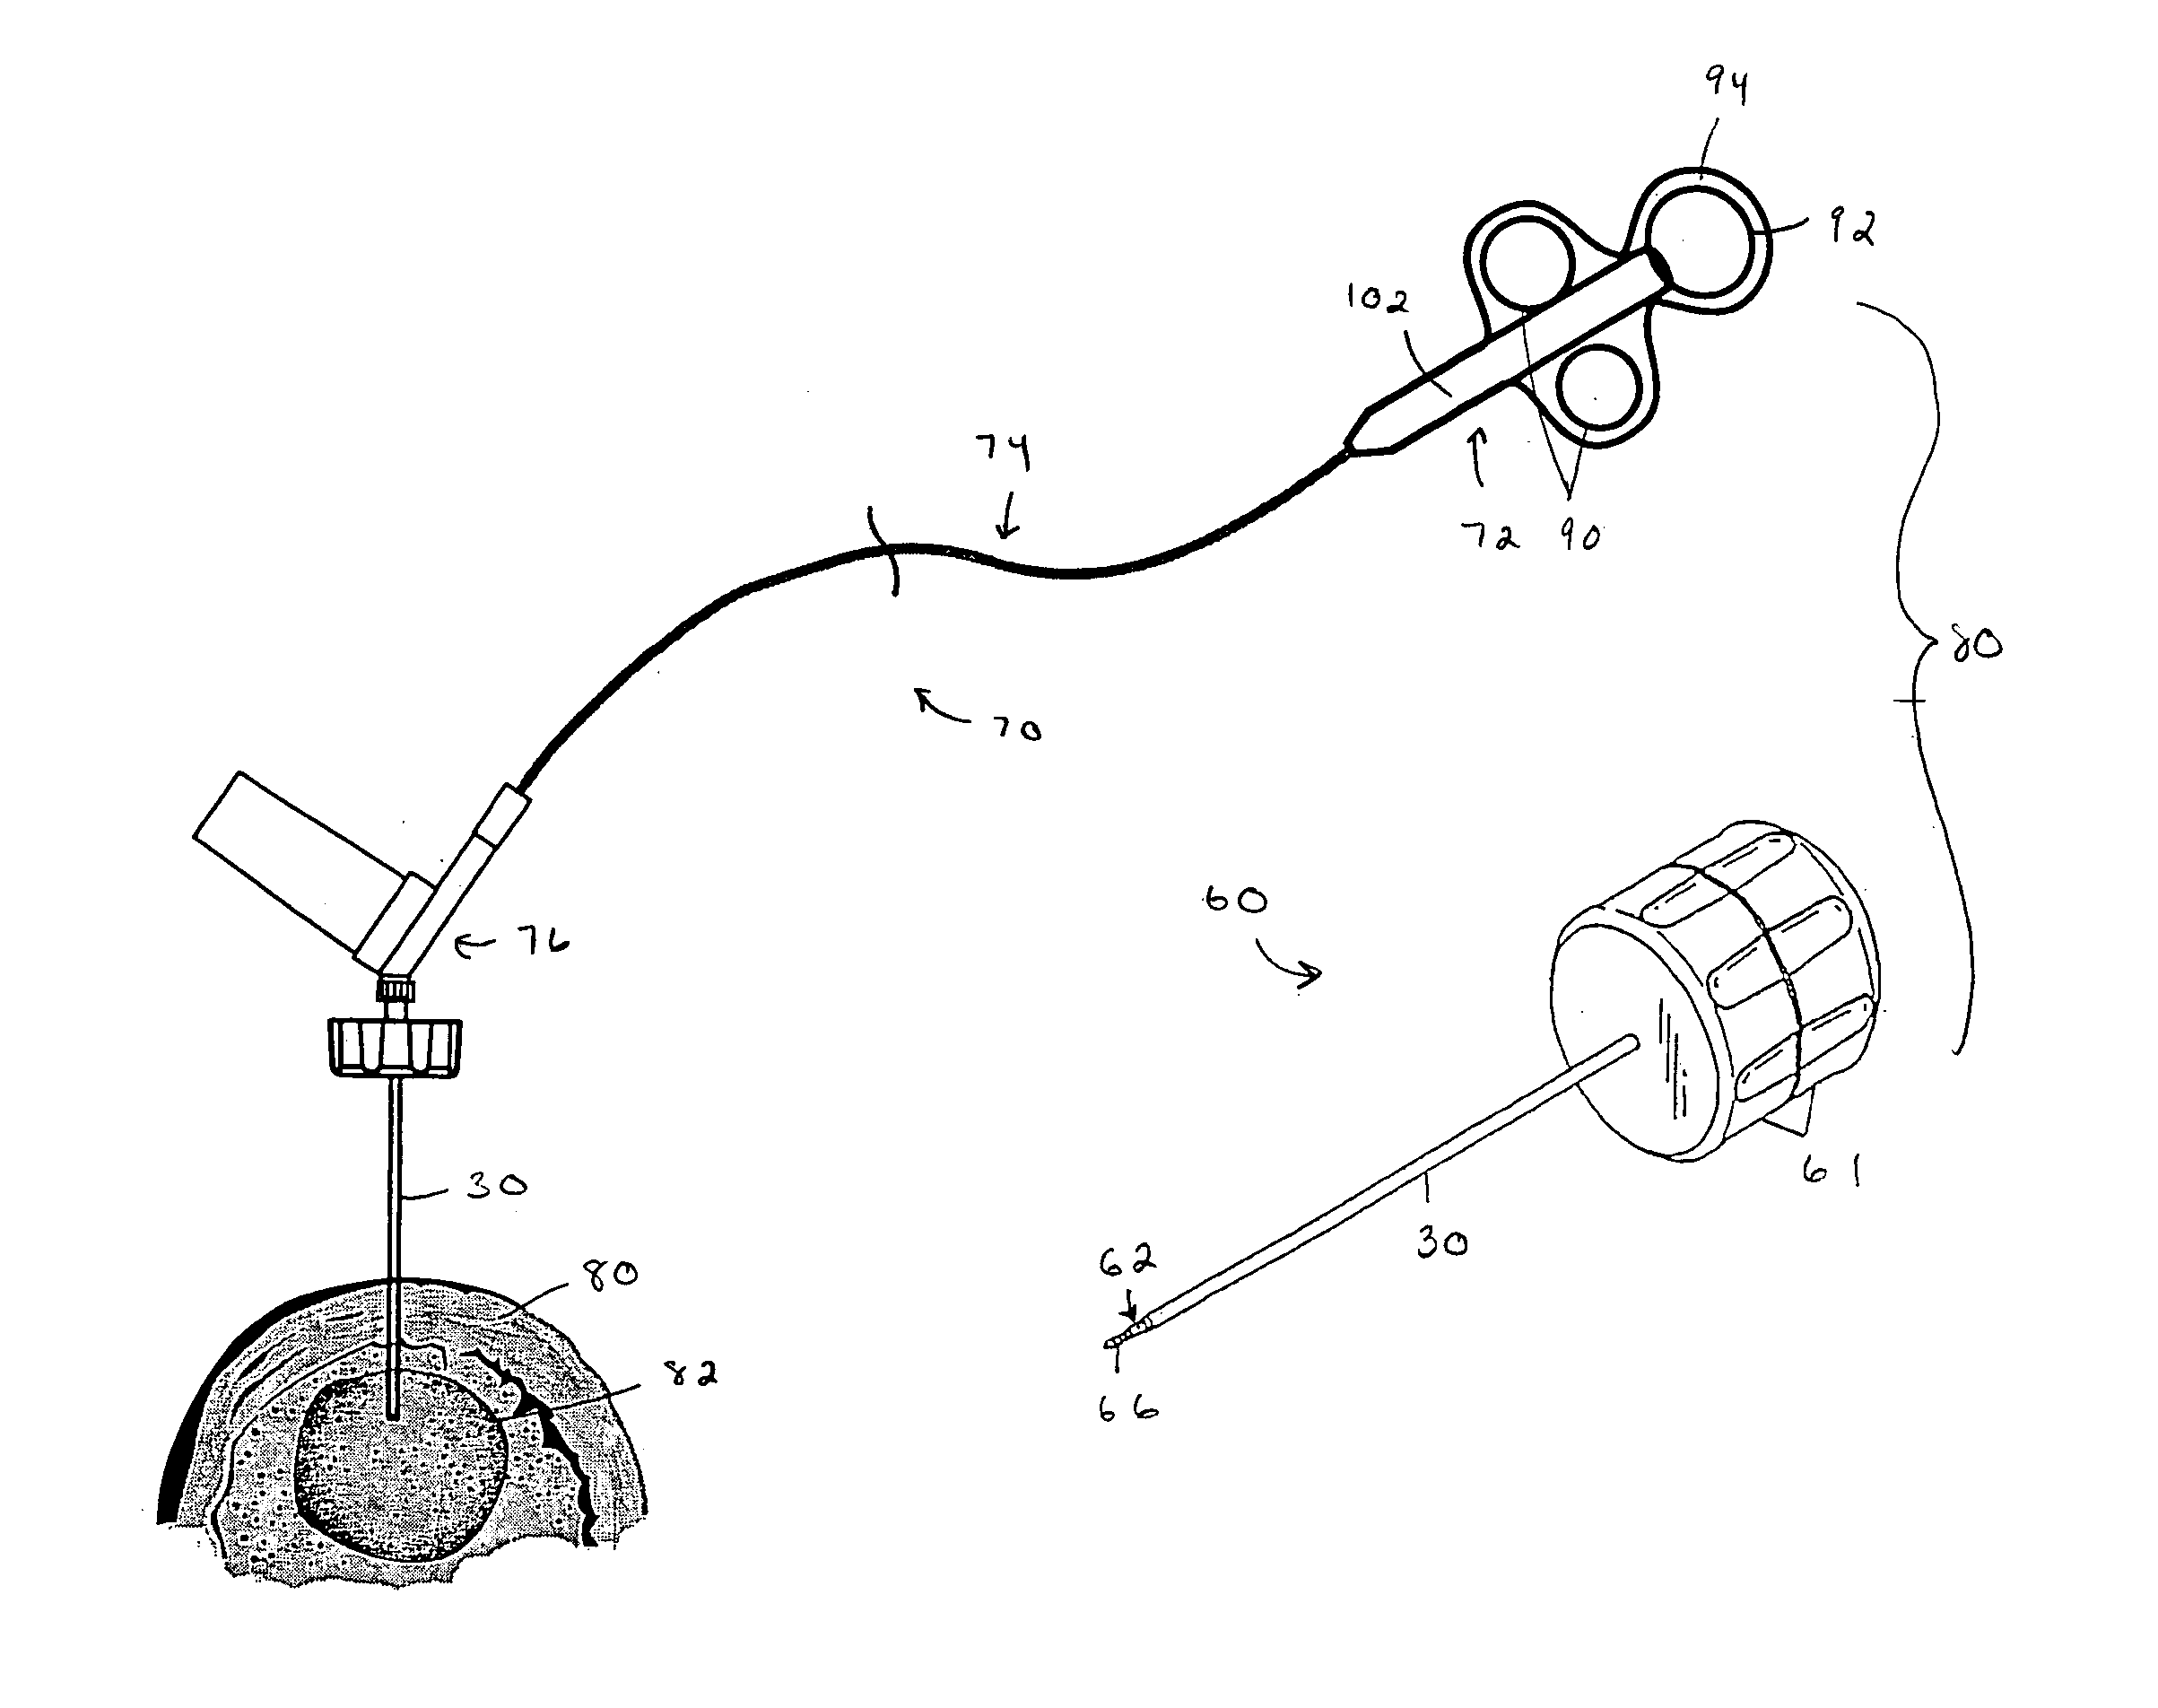 Remotely actuated system for bone cement delivery